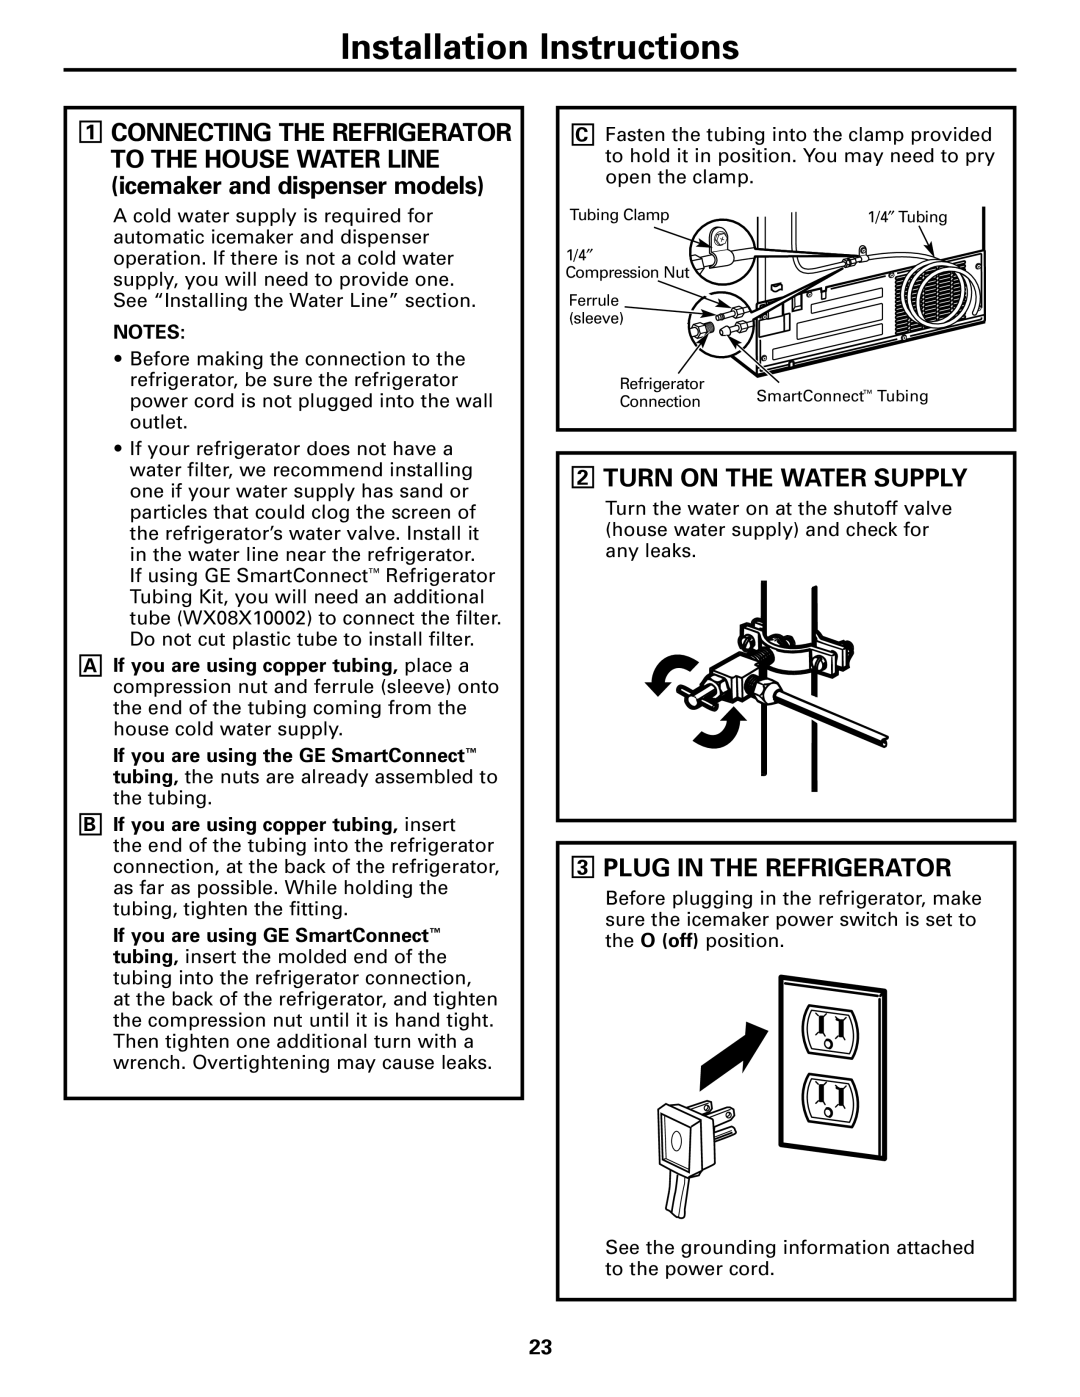 GE MODELS 23 AND 25 installation instructions Turn On The Water Supply, Plug In The Refrigerator, Installation Instructions 